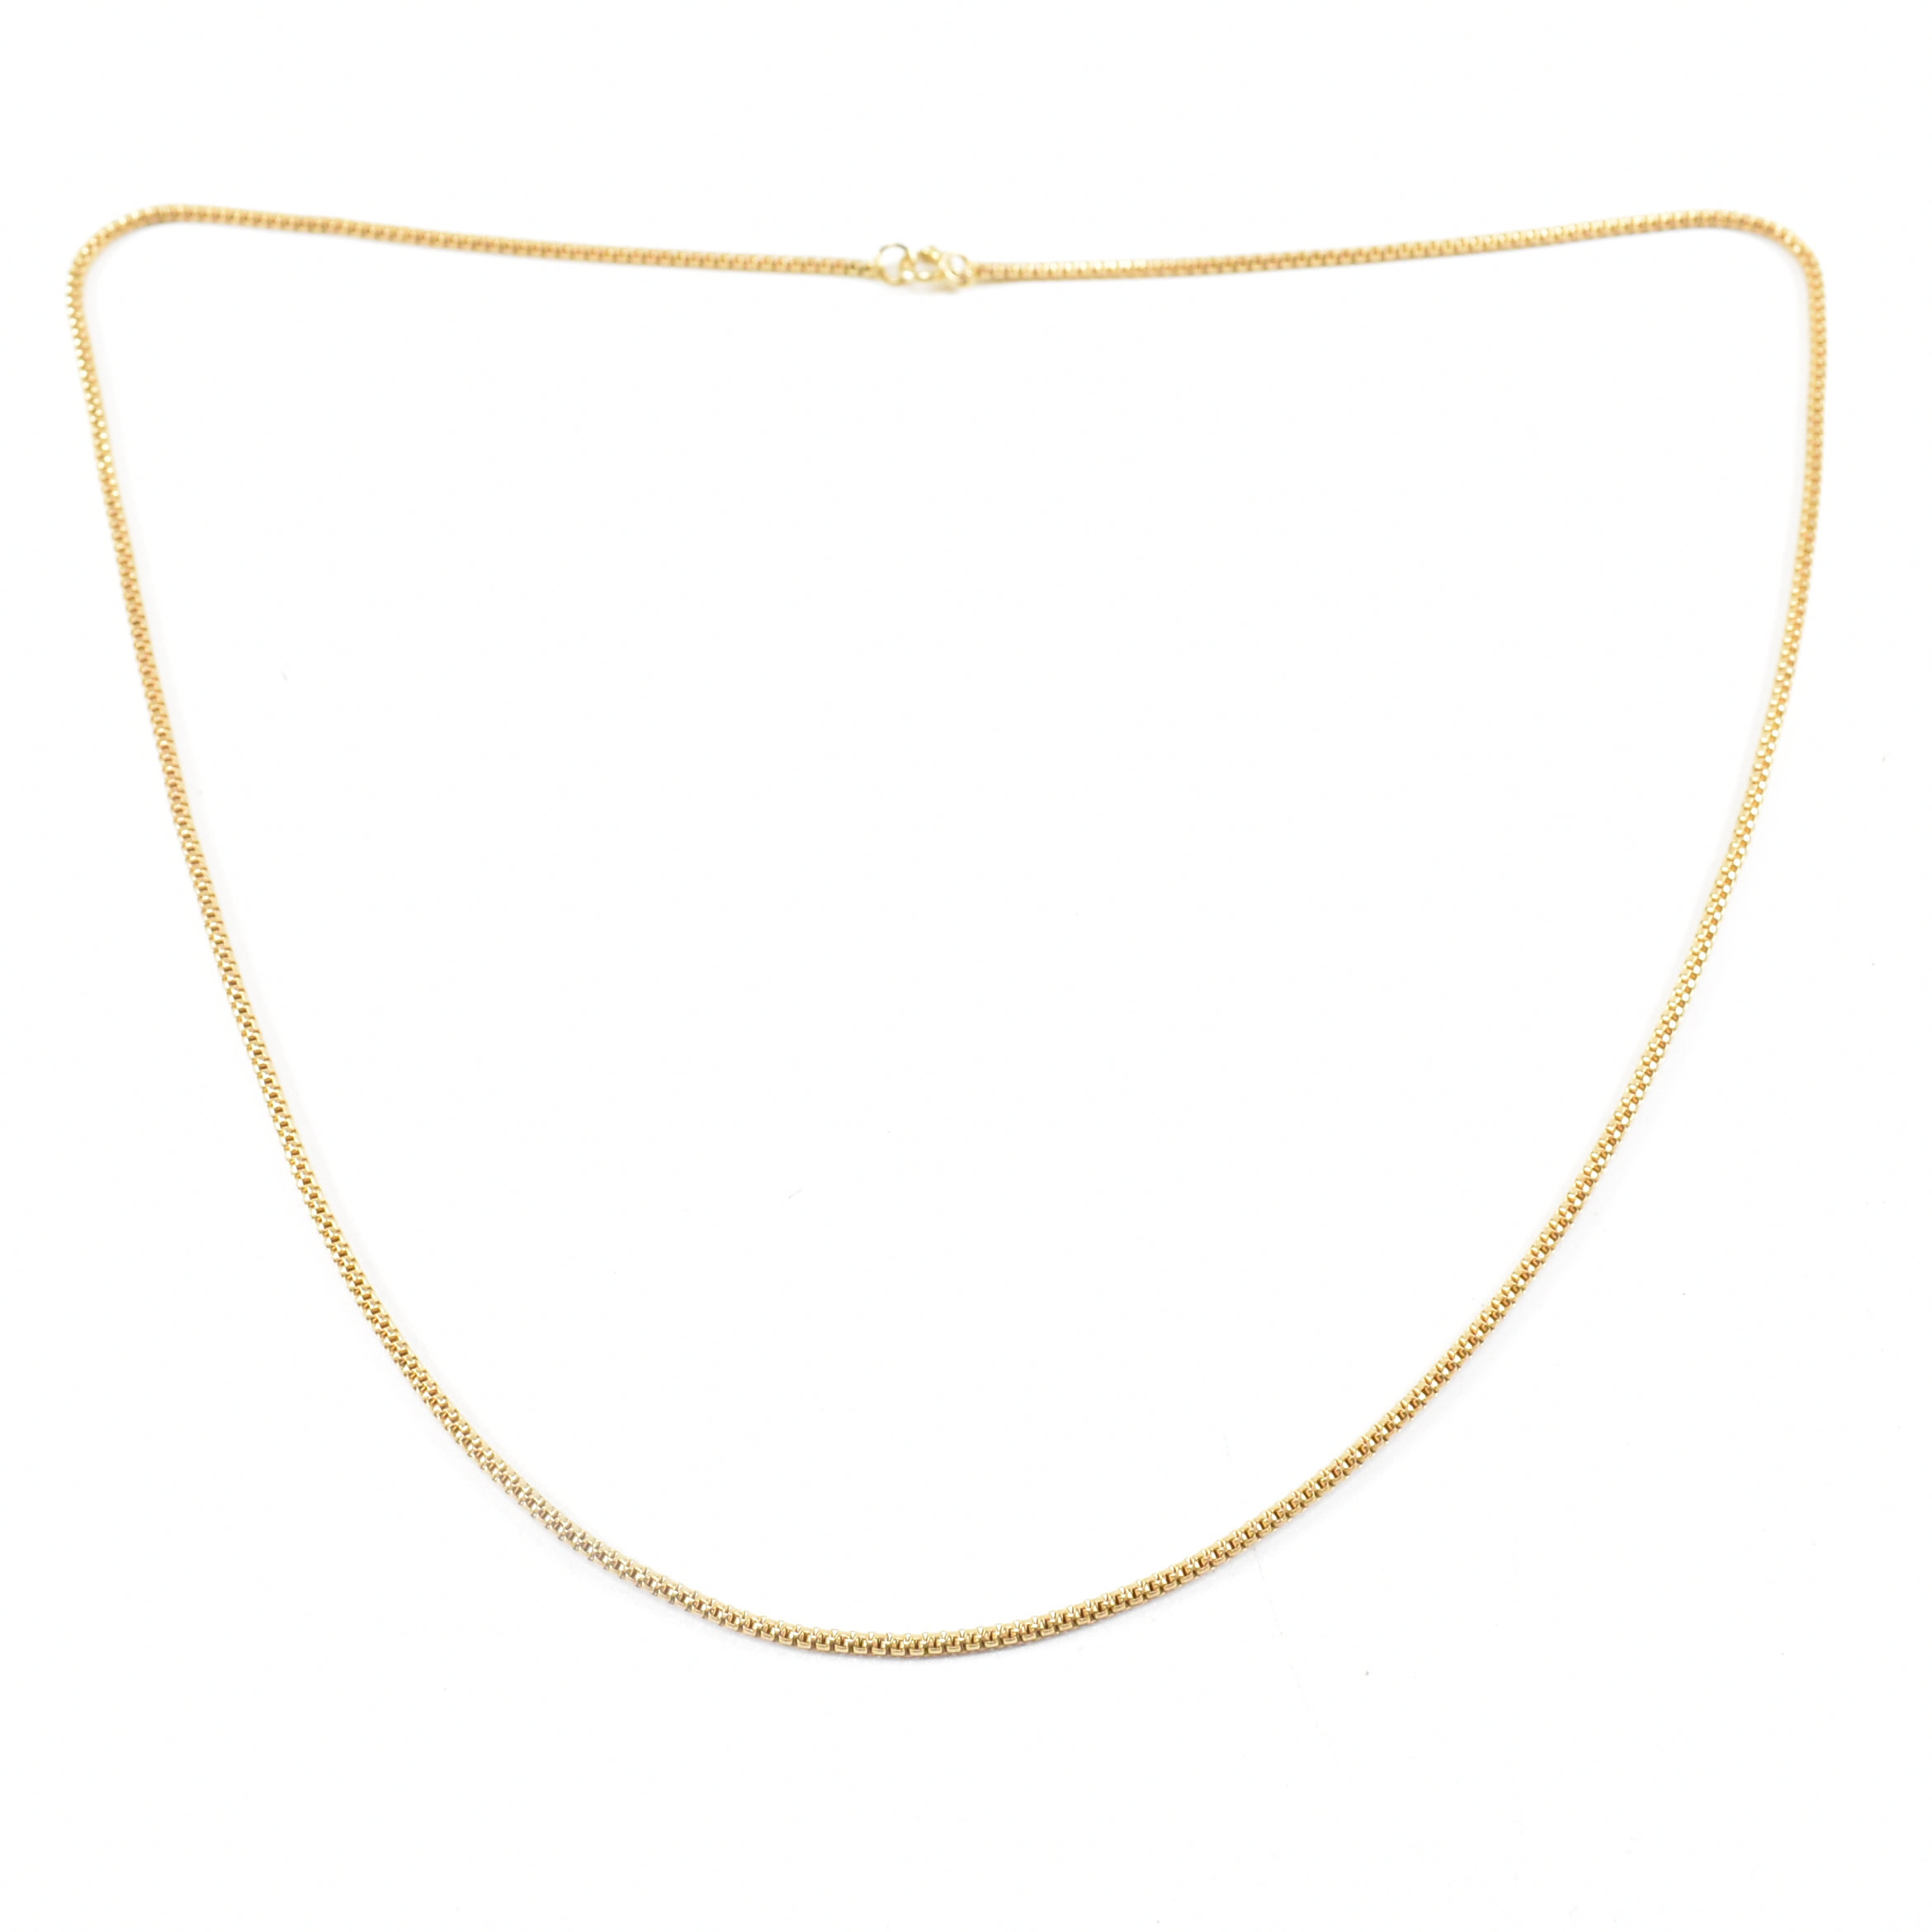 VINTAGE 9CT GOLD NECKLACE CHAIN - Image 6 of 6